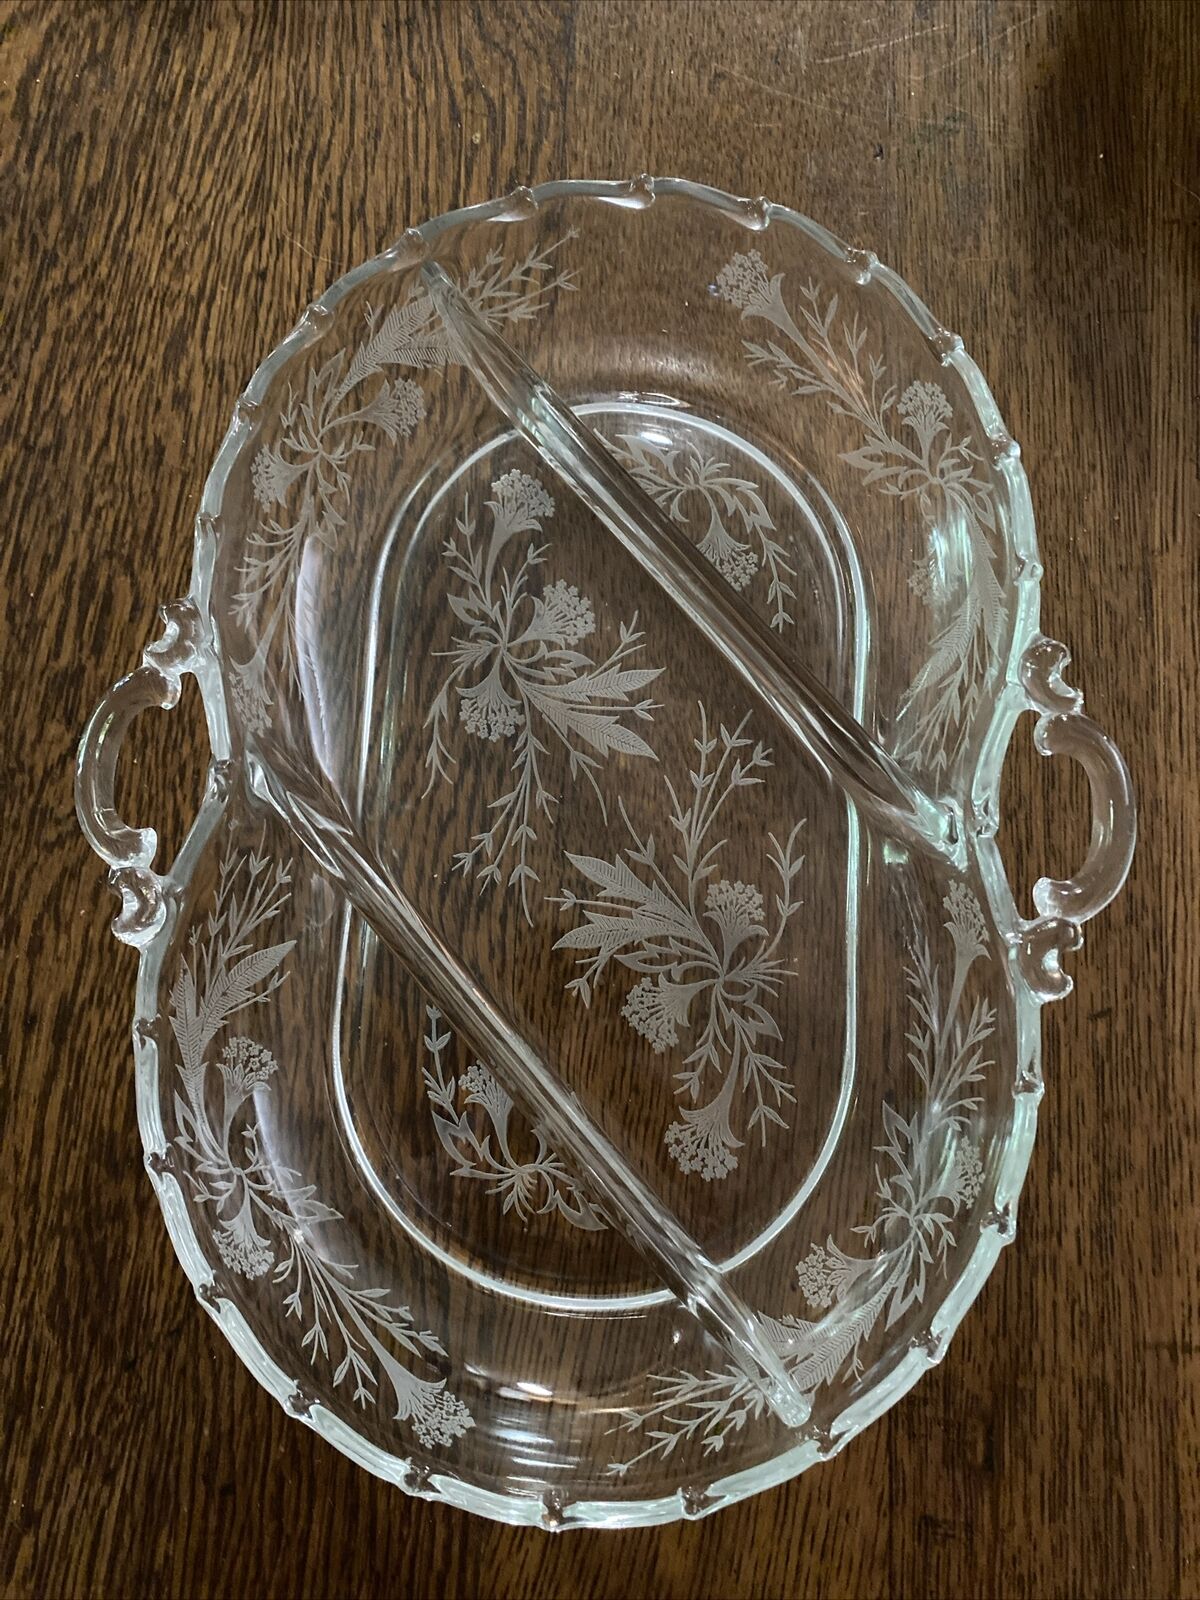 Fostoria Heather 3 Part Divided Relish Tray Dish Etched Flowers Glass w/ Handles